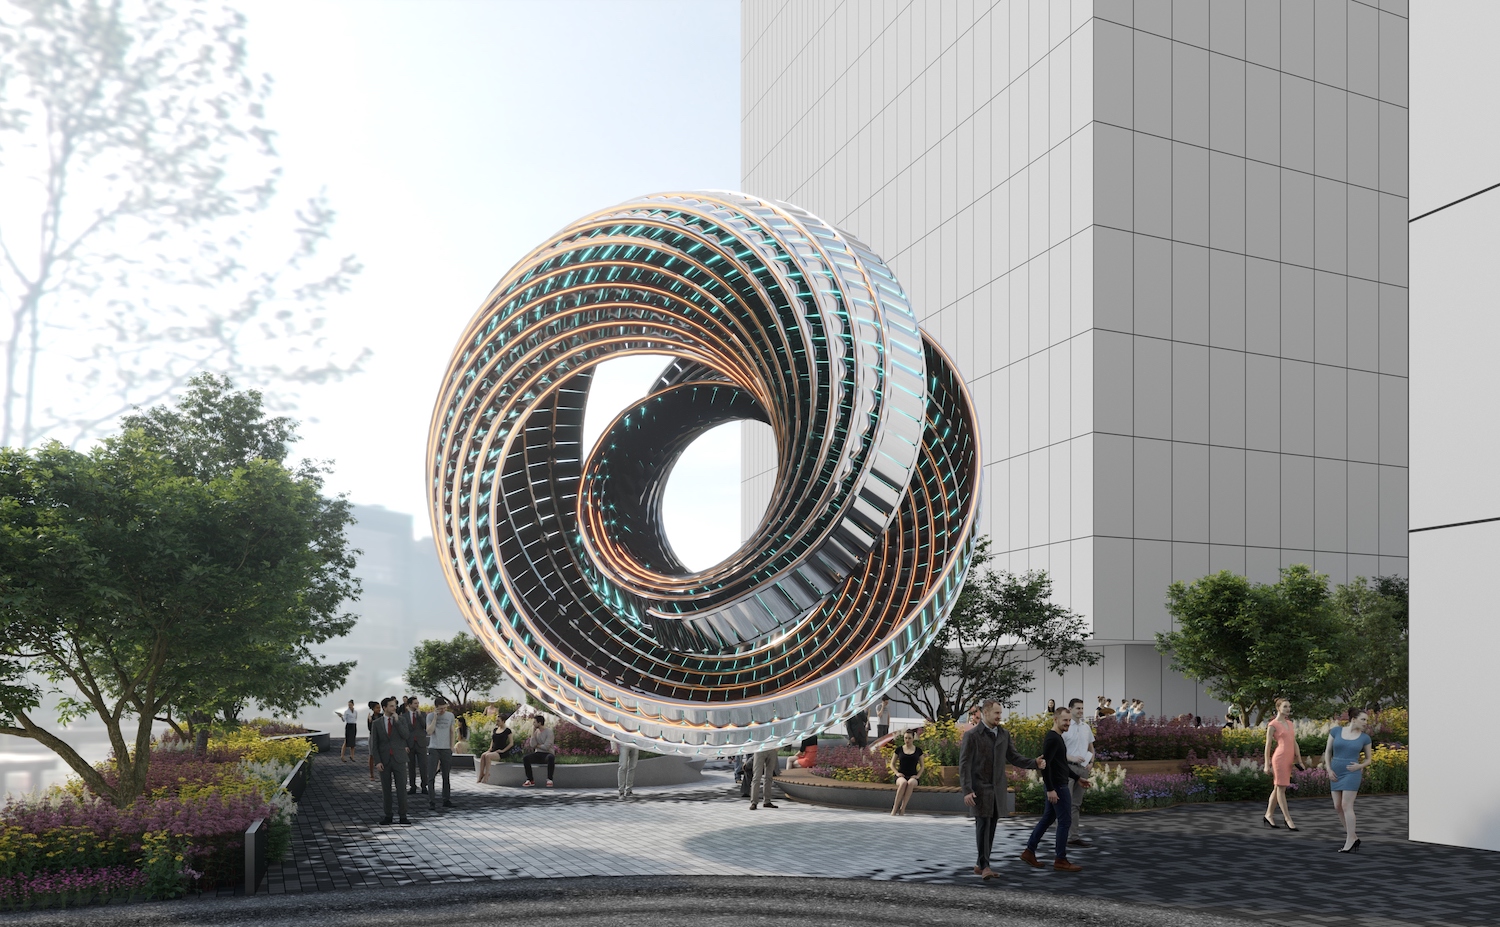 Kinetic sculpture, Moving Art, Outdoor Installations, Kinetic Art